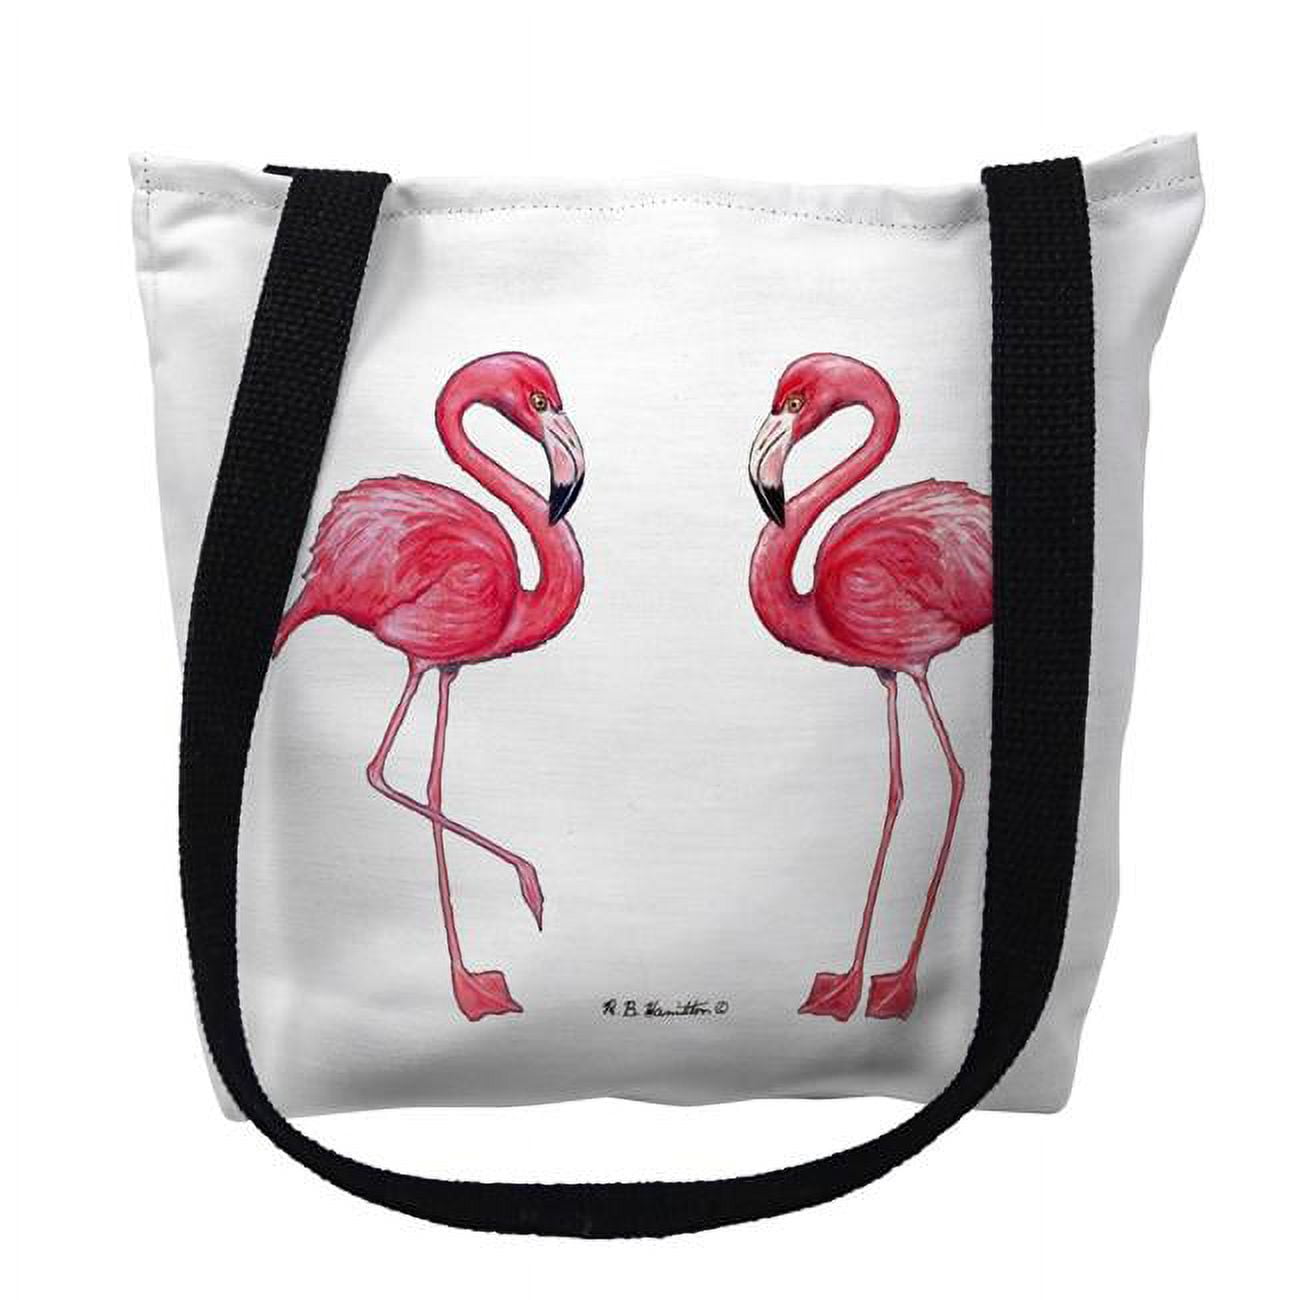 TY084WS 13 x 13 in. Flamingo White Background Tote Bag - Small